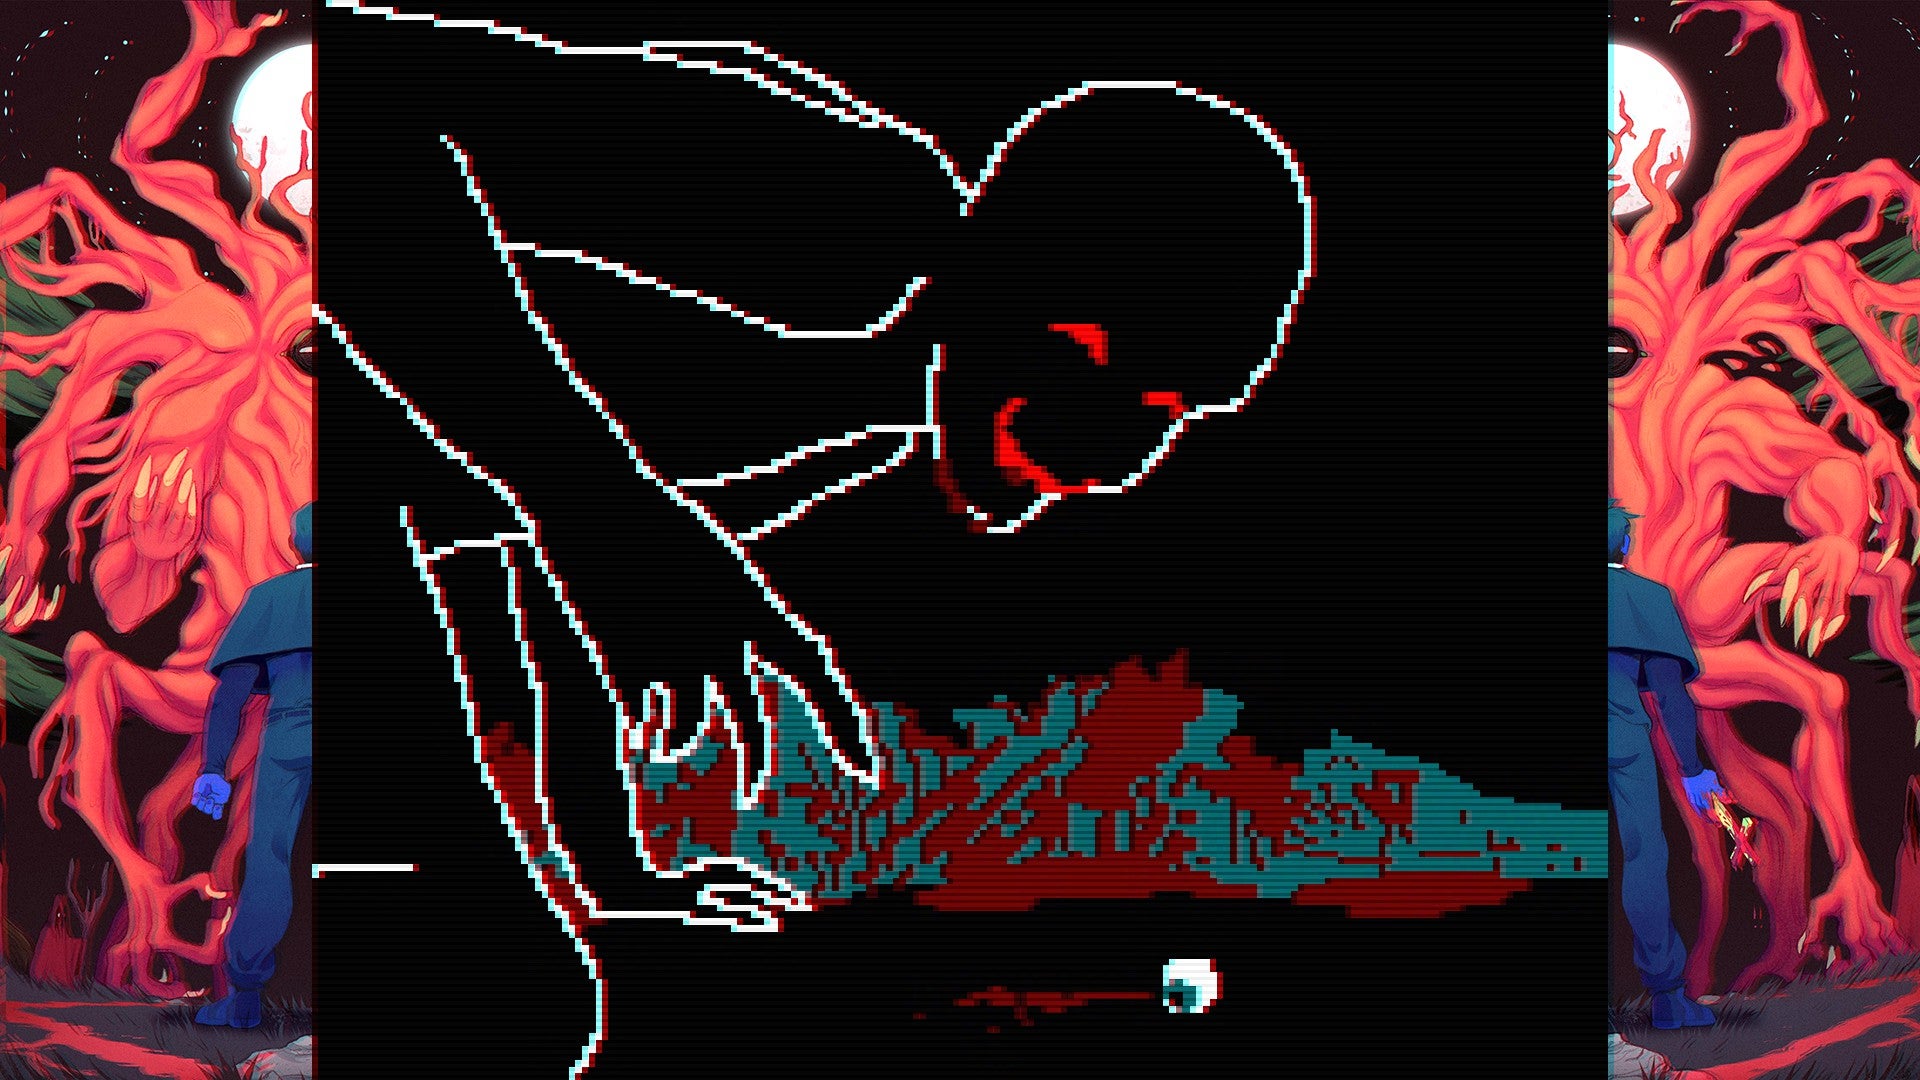 A creepy image.  The outline of a humanoid creature with red eyes and blood dripping from its mouth, turning towards the viewer.  It is on its hands and knees eating a body.  An eyeball sits on the floor nearby.